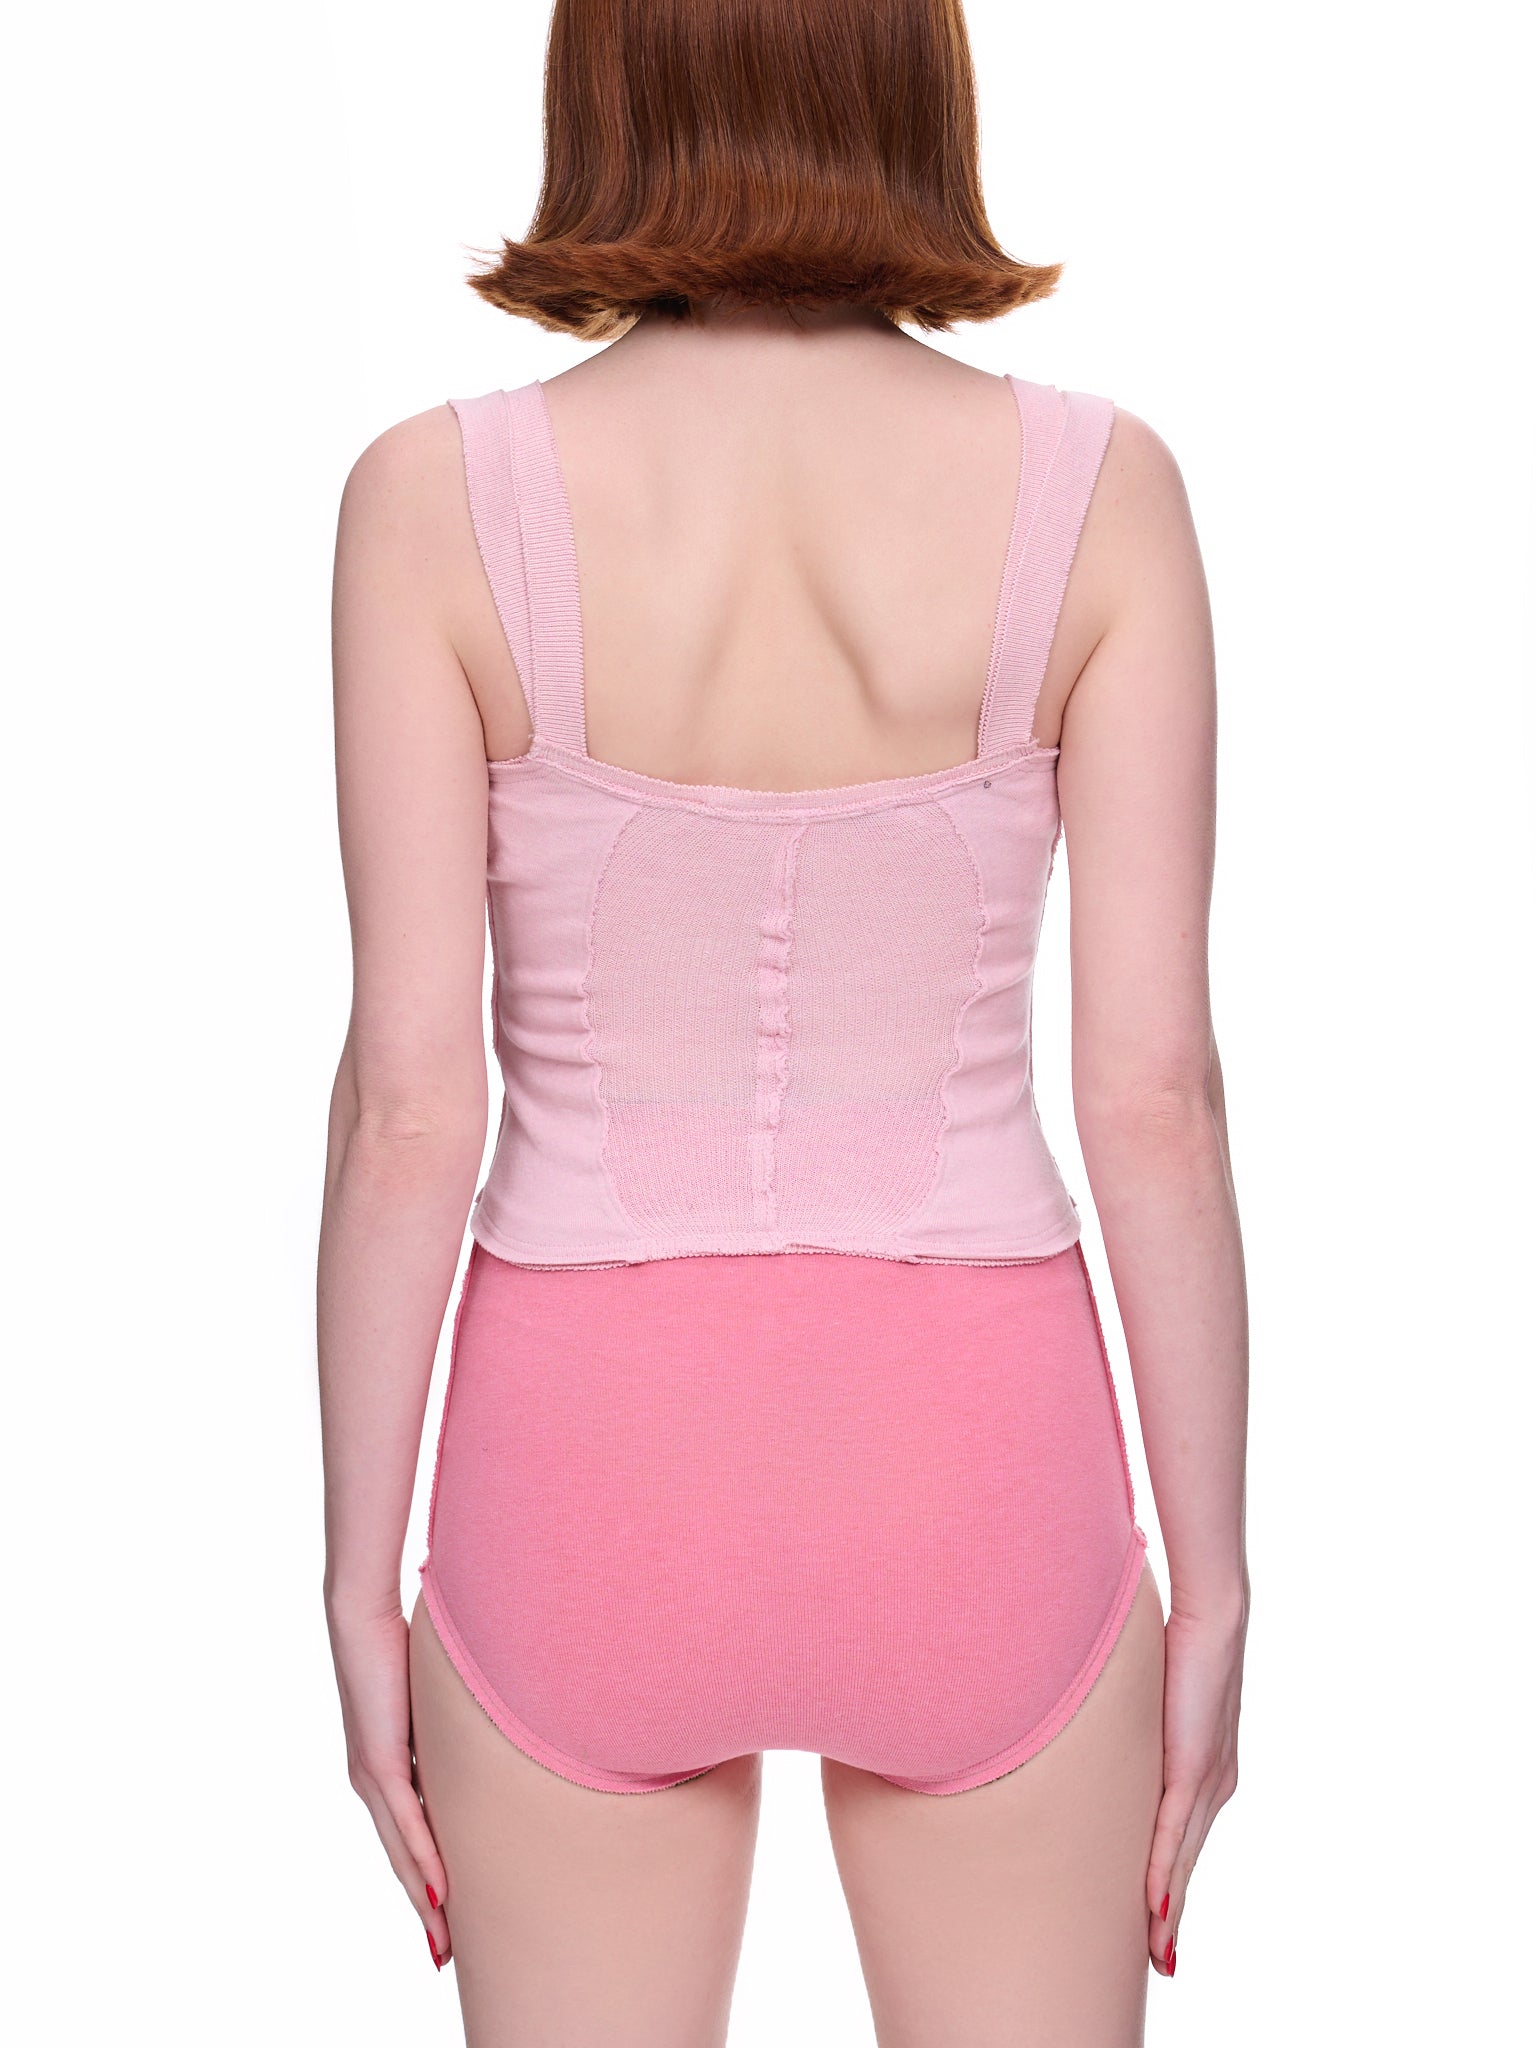 Knit Corset Top (TO05843114-1211-LIGHT-PINK)